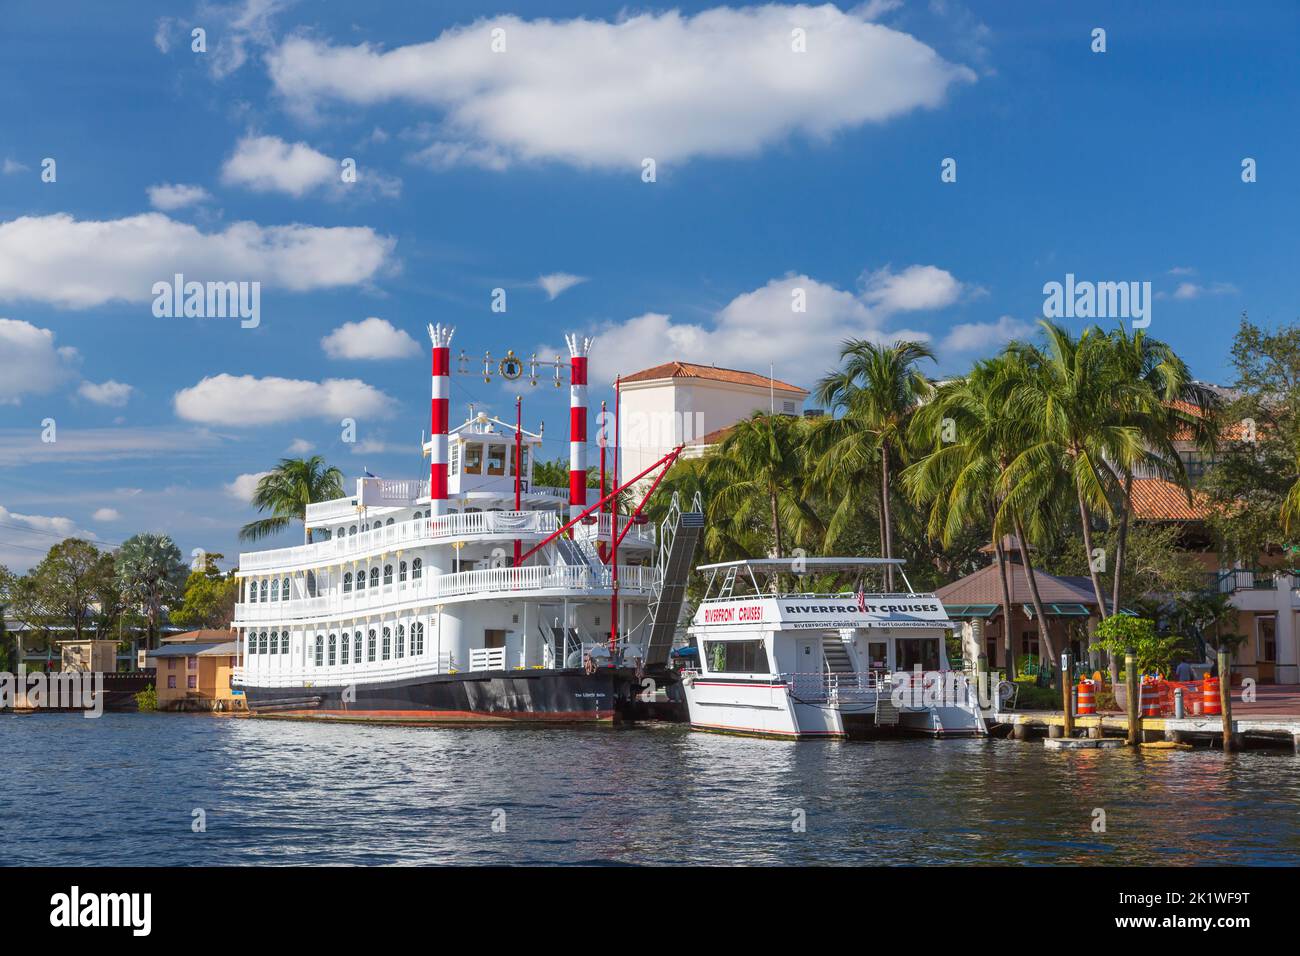 The Liberty Belle excursion riverboat in Fort Lauderdale, Florida, USA. Stock Photo